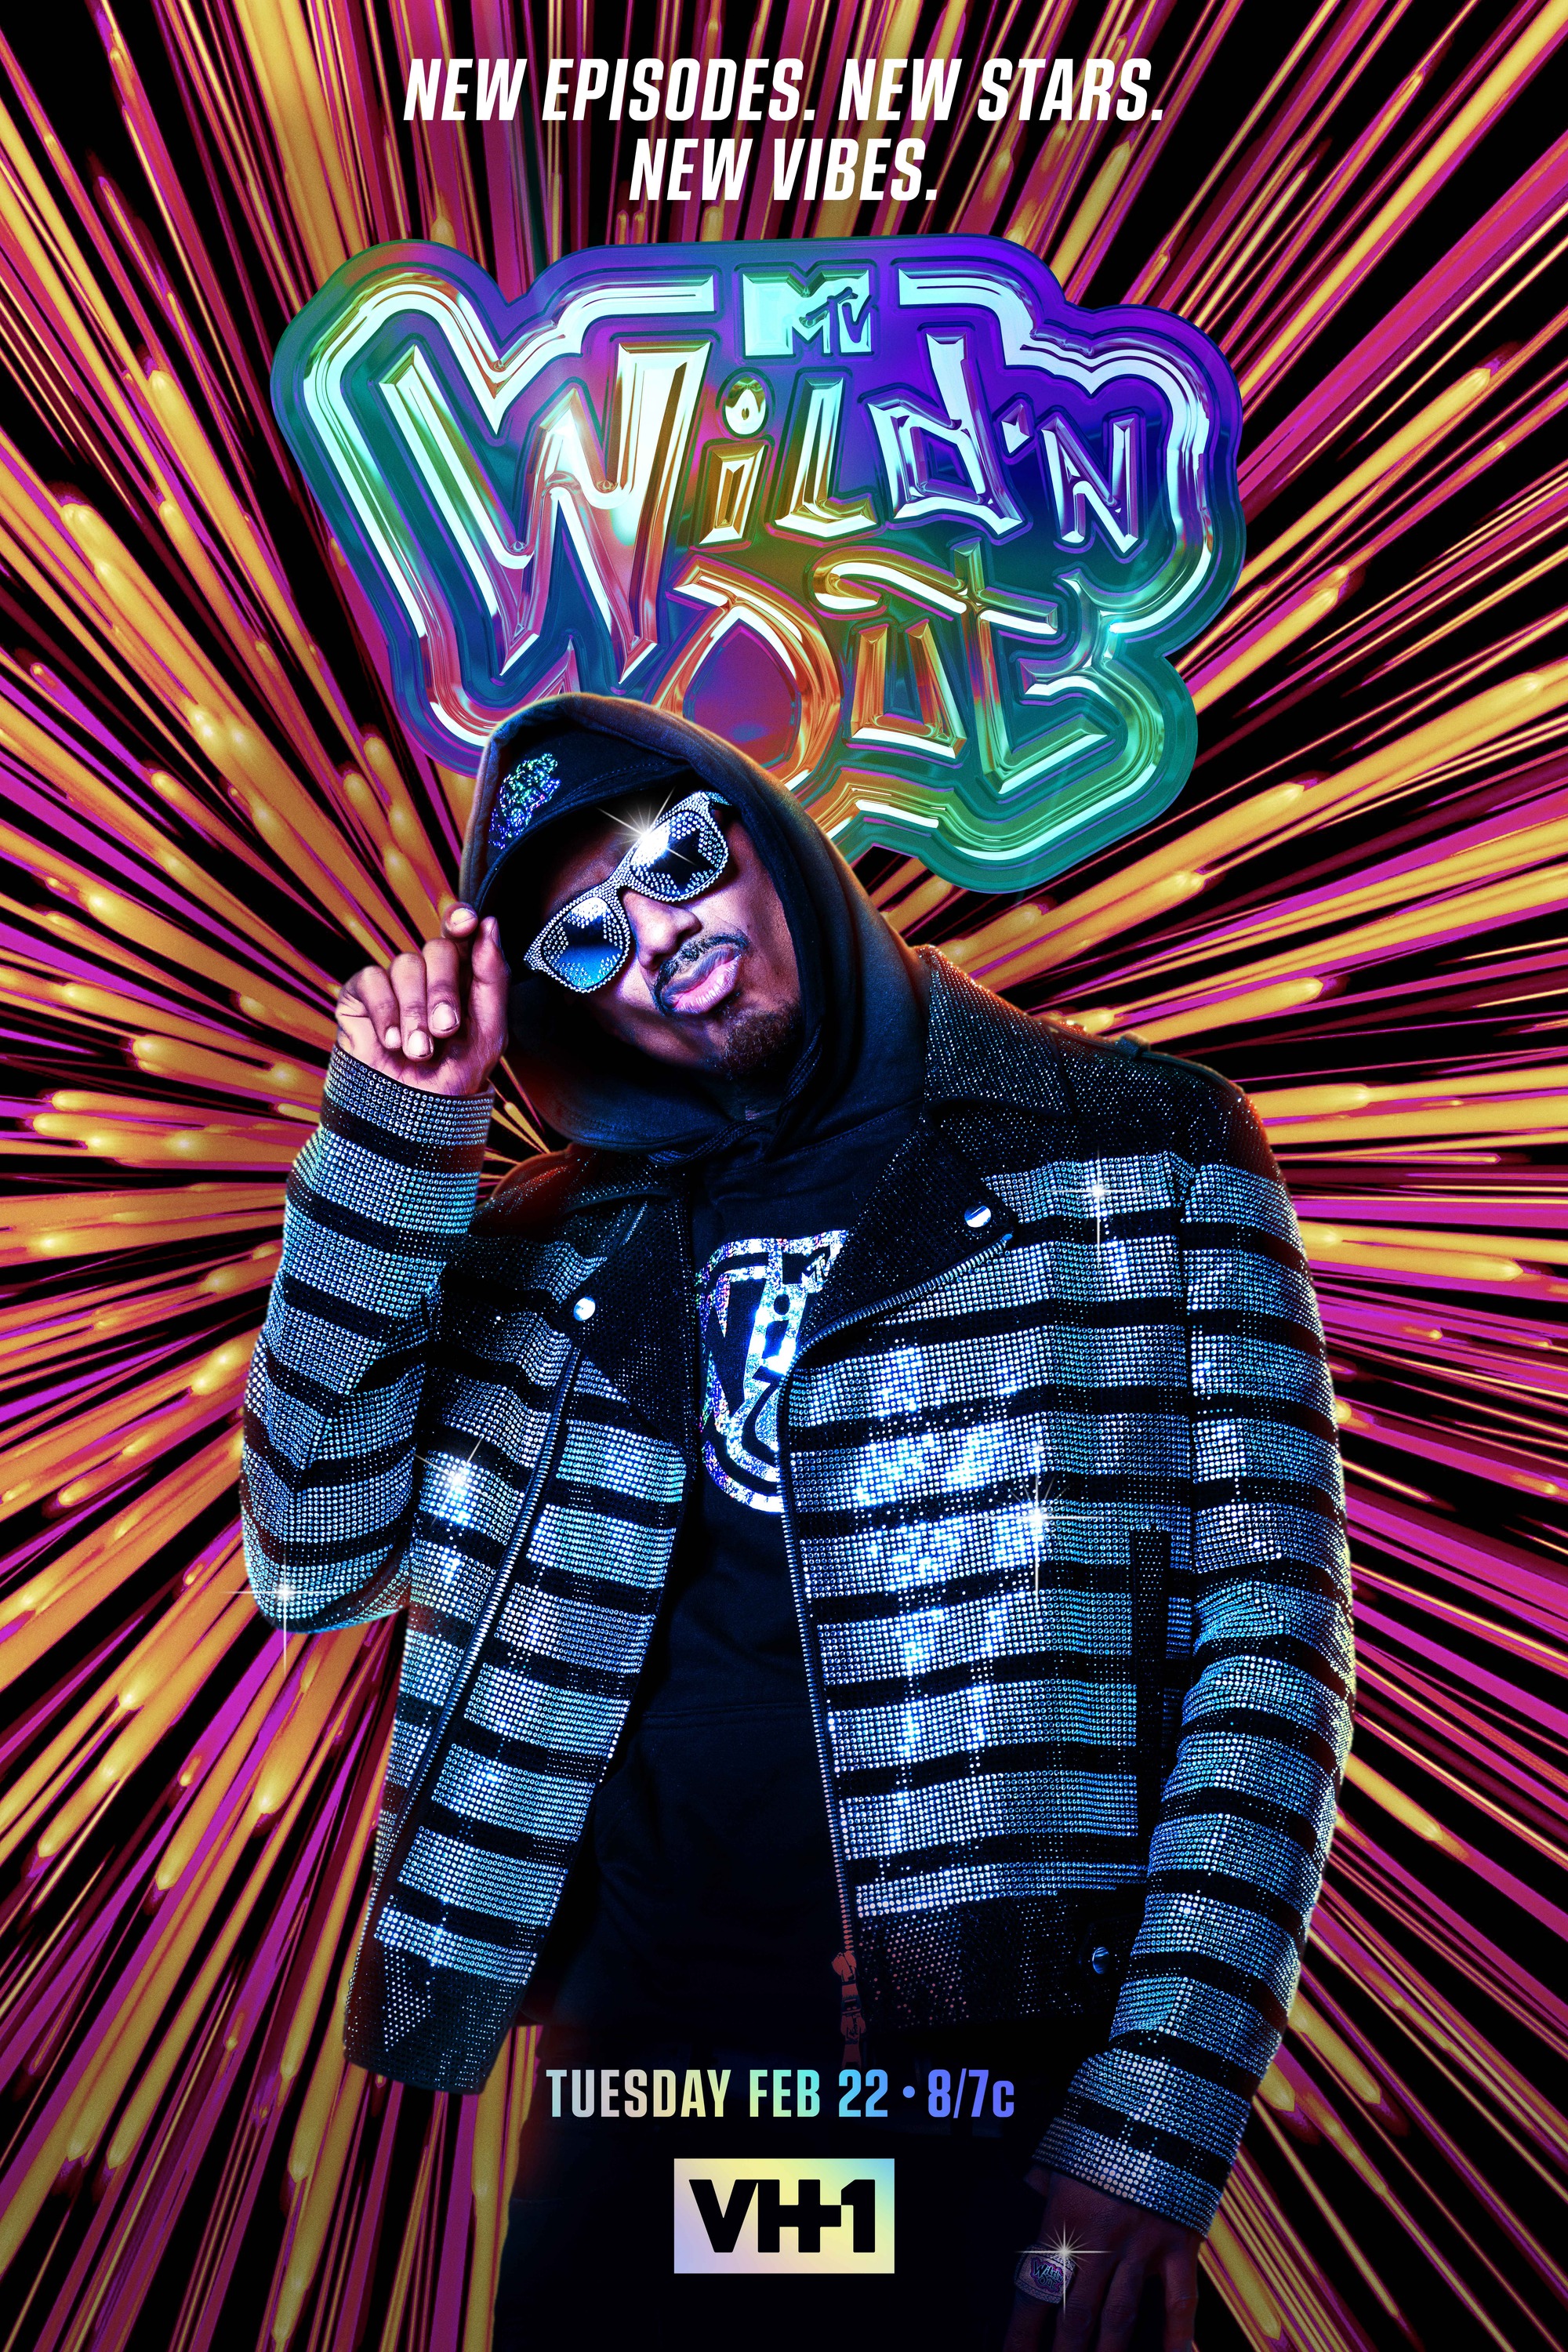 Mega Sized TV Poster Image for Wild 'N Out (#2 of 4)